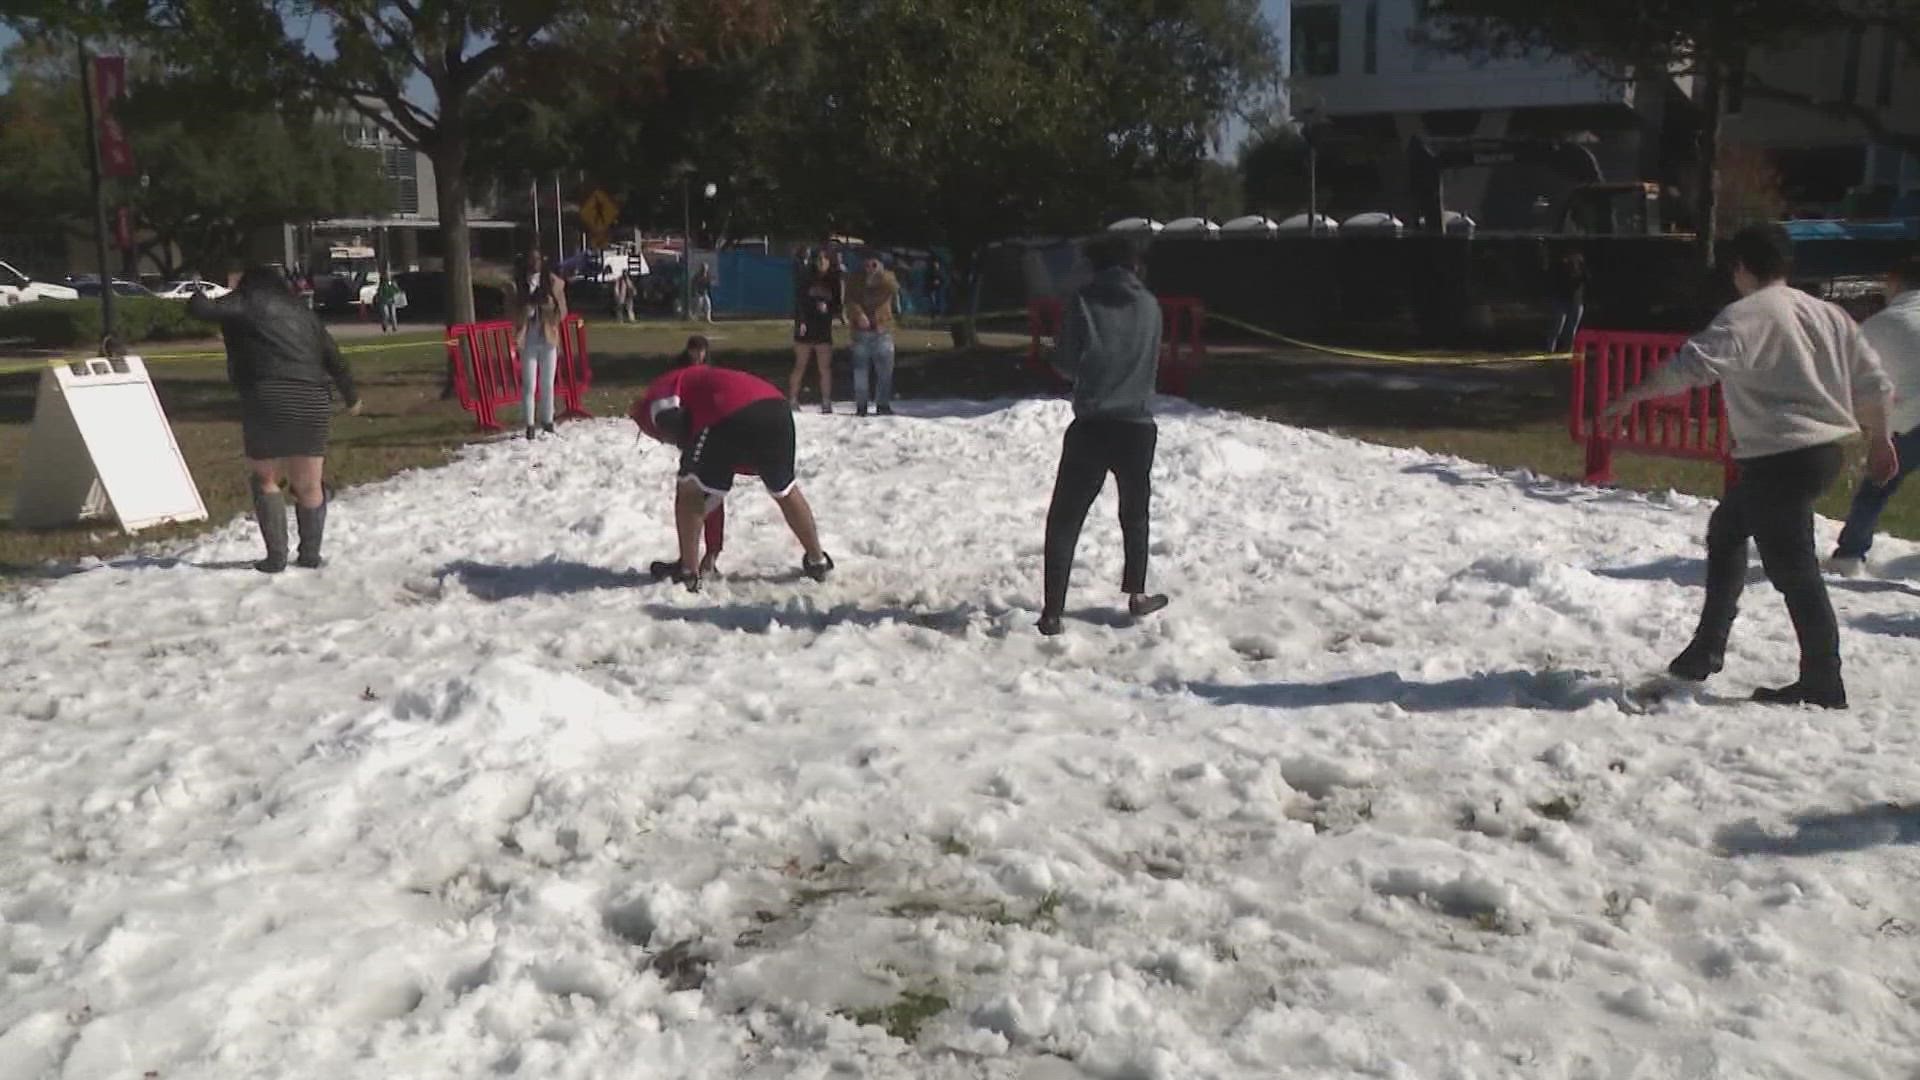 There was snow on the University of Houston's campus Thursday, Dec. 1, giving students a chance to chill out before the start of final exams.